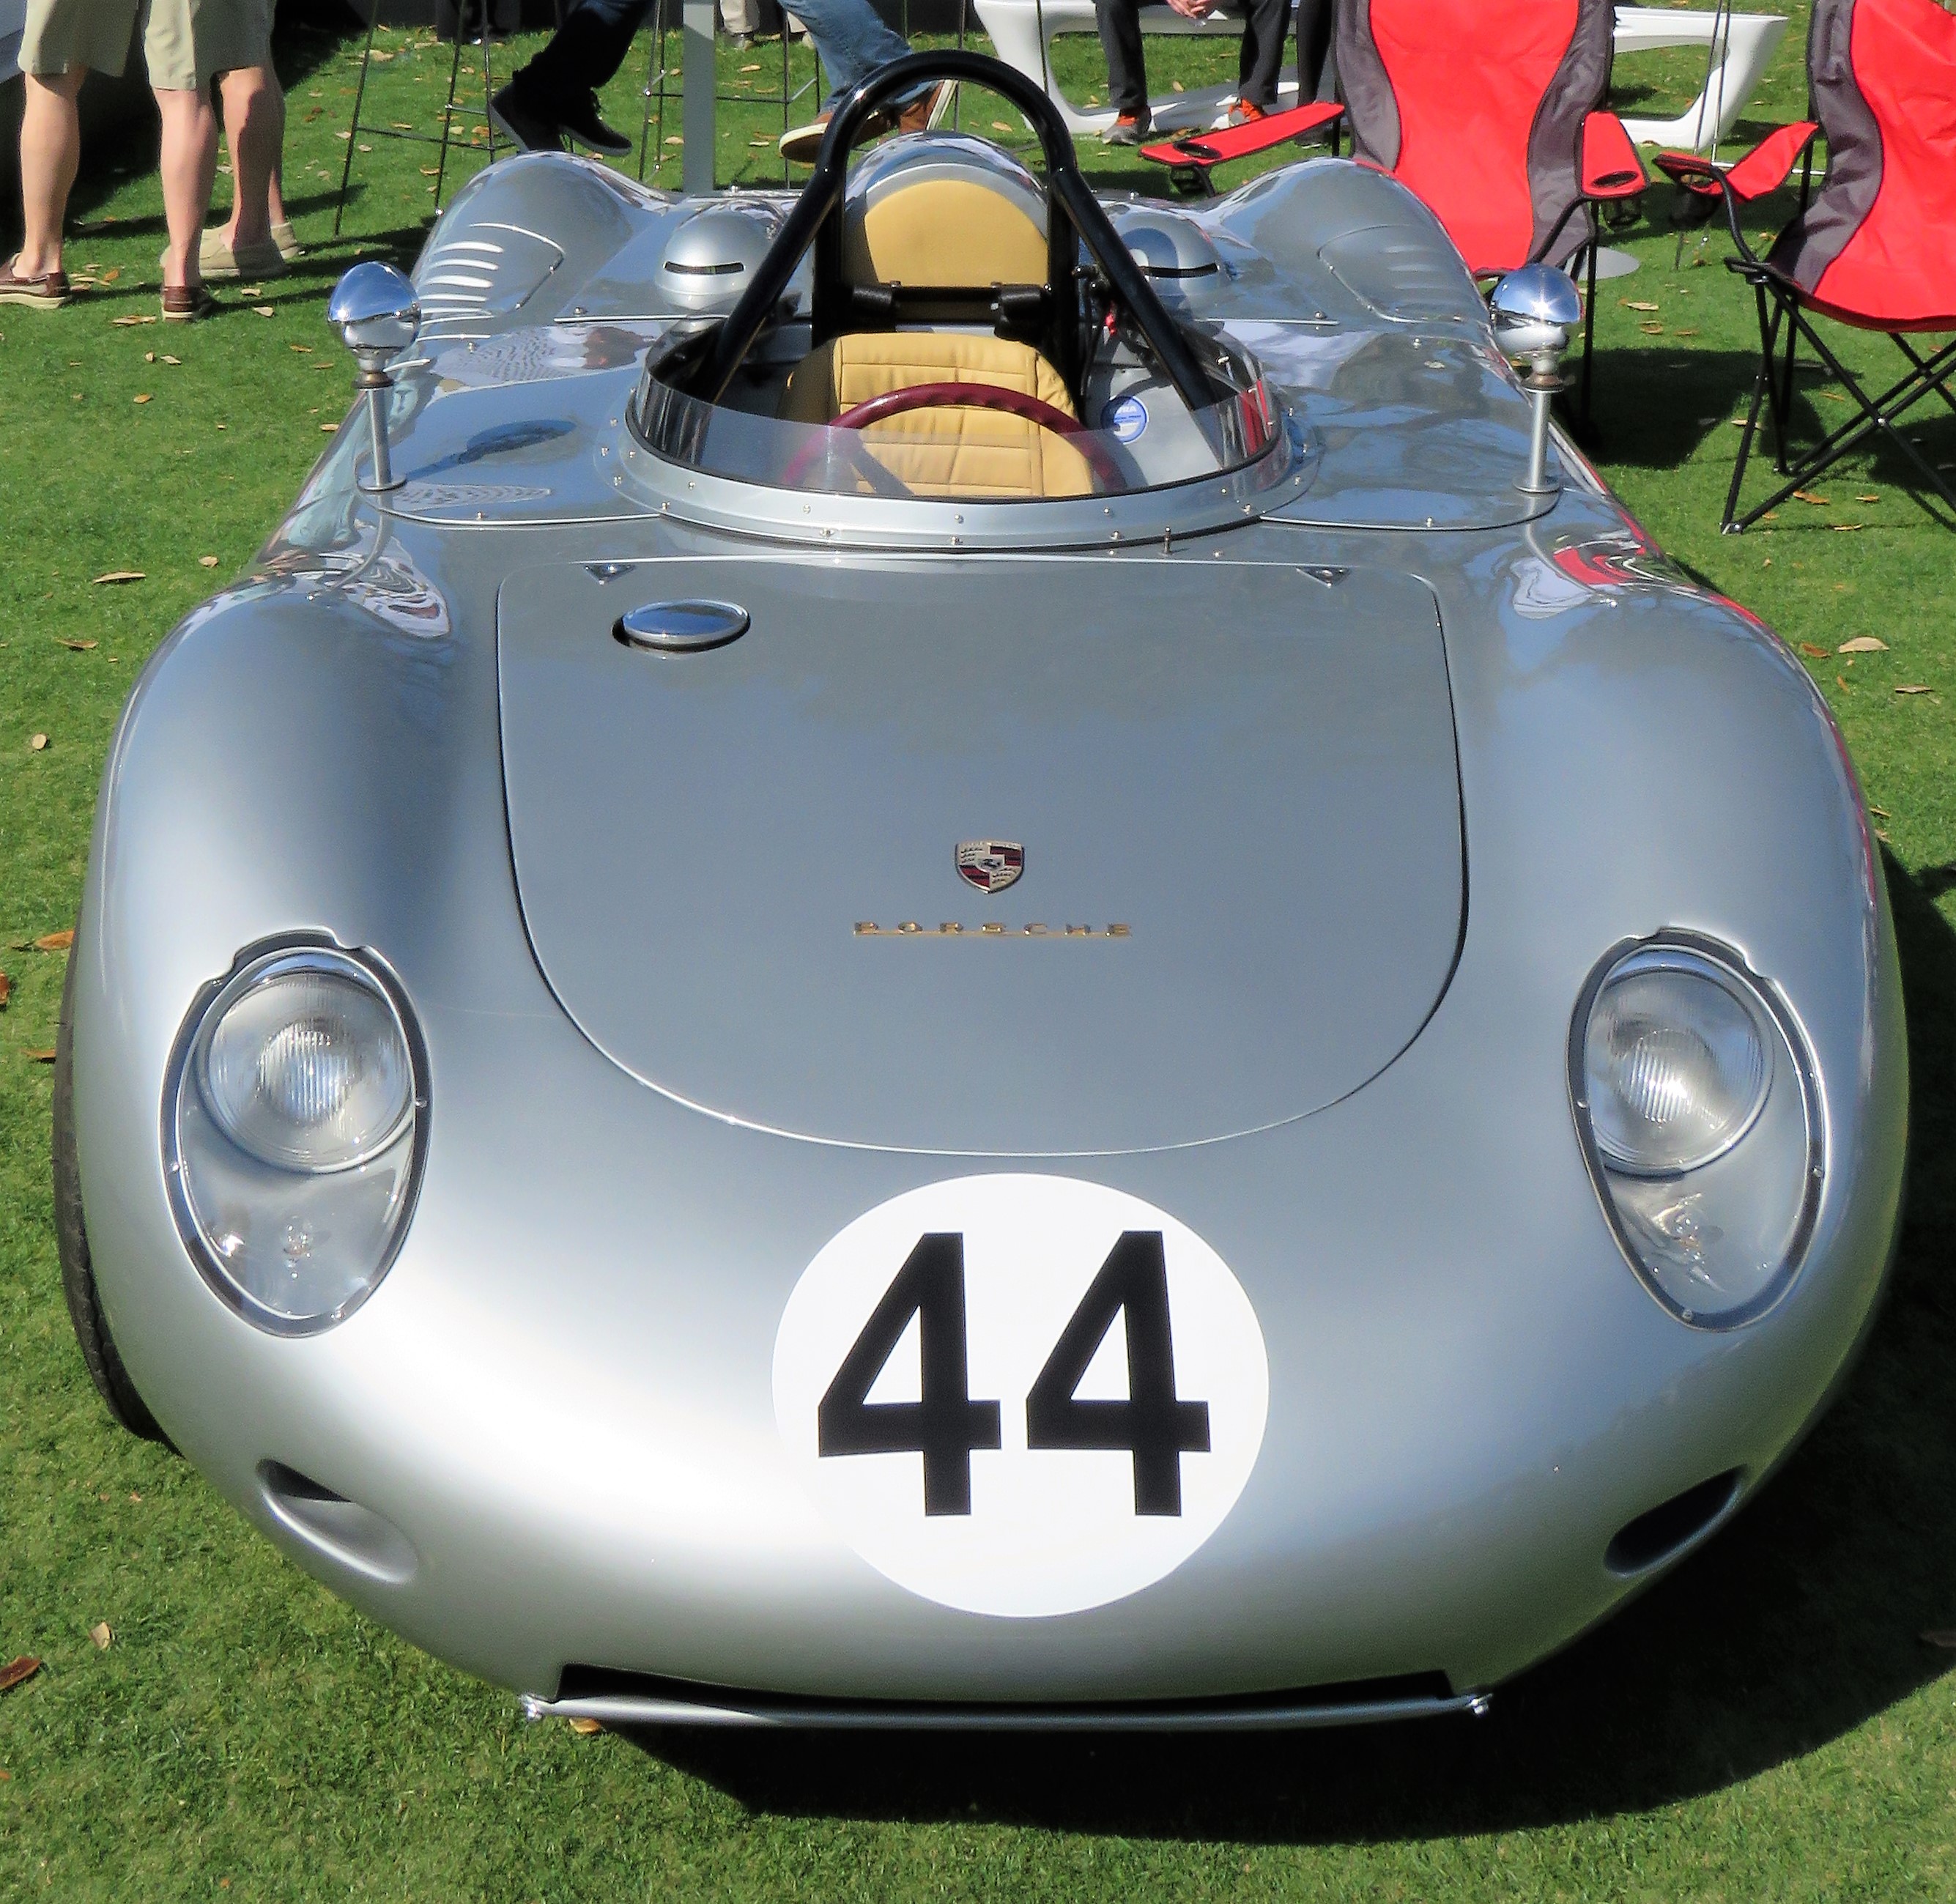 , Impressive Amelia Island Concours that became a moveable feast, ClassicCars.com Journal